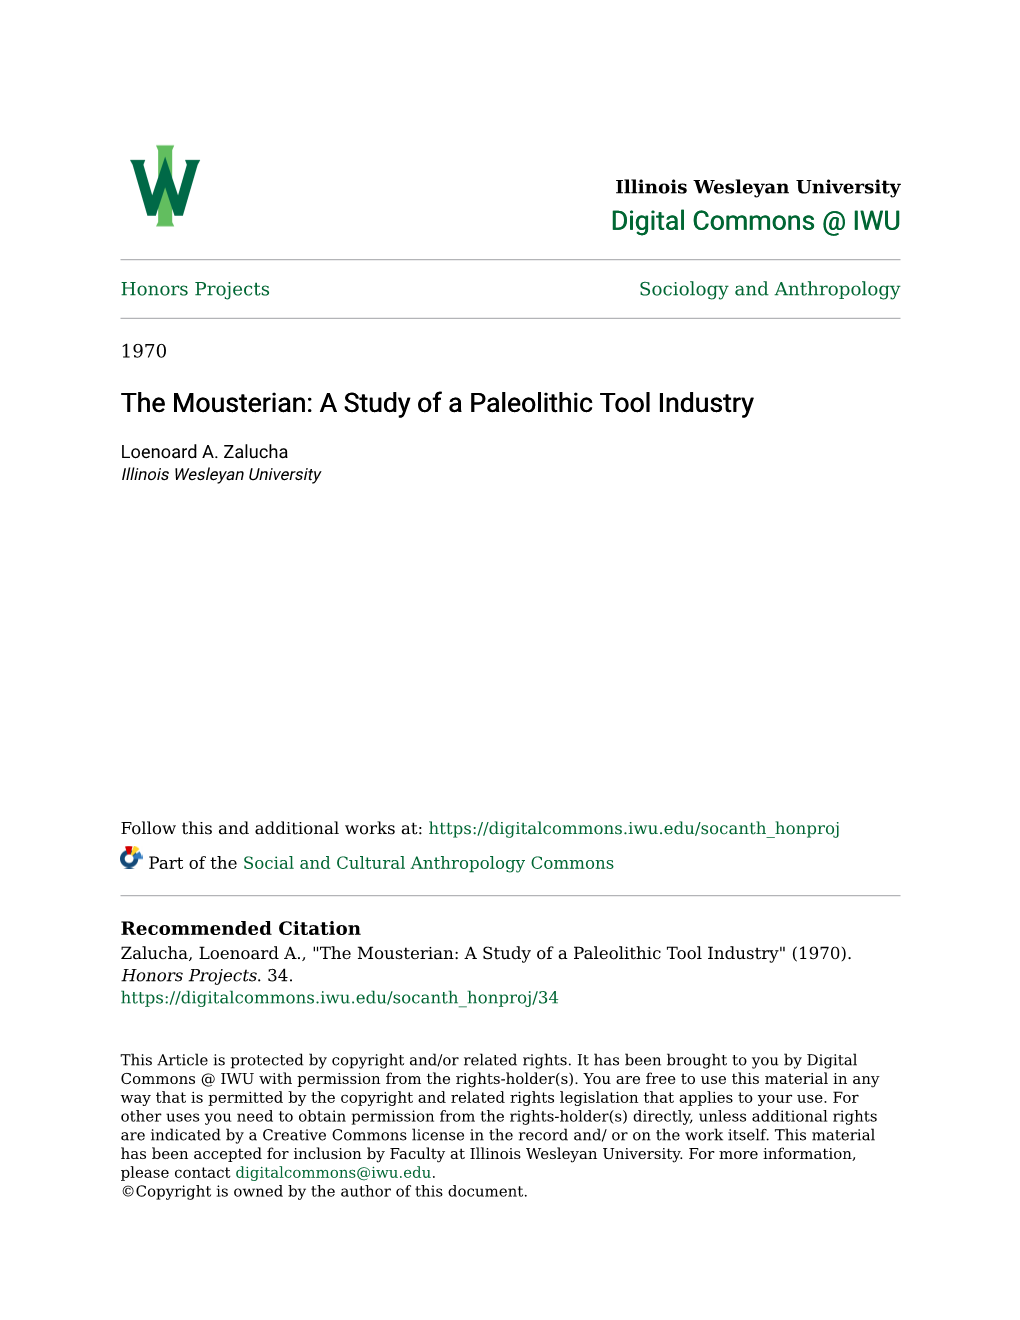 The Mousterian: a Study of a Paleolithic Tool Industry